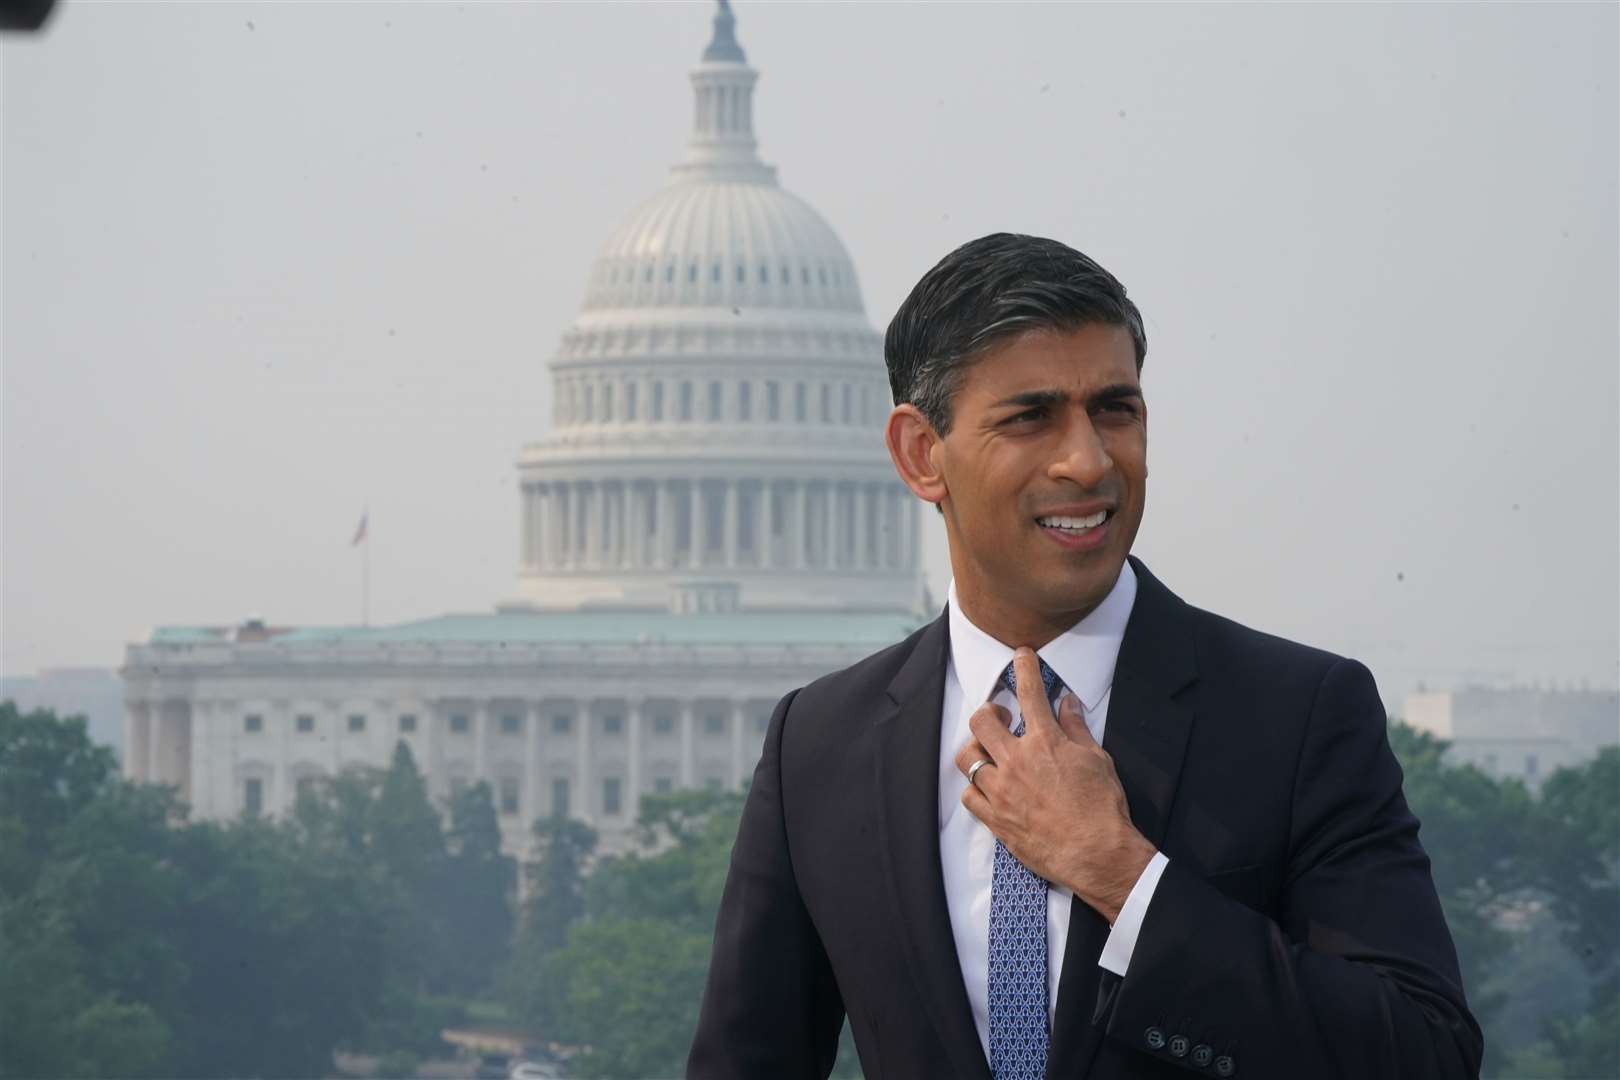 Prime Minister Rishi Sunak speaks to the media during his visit to Washington DC in the US (Niall Carson/PA)